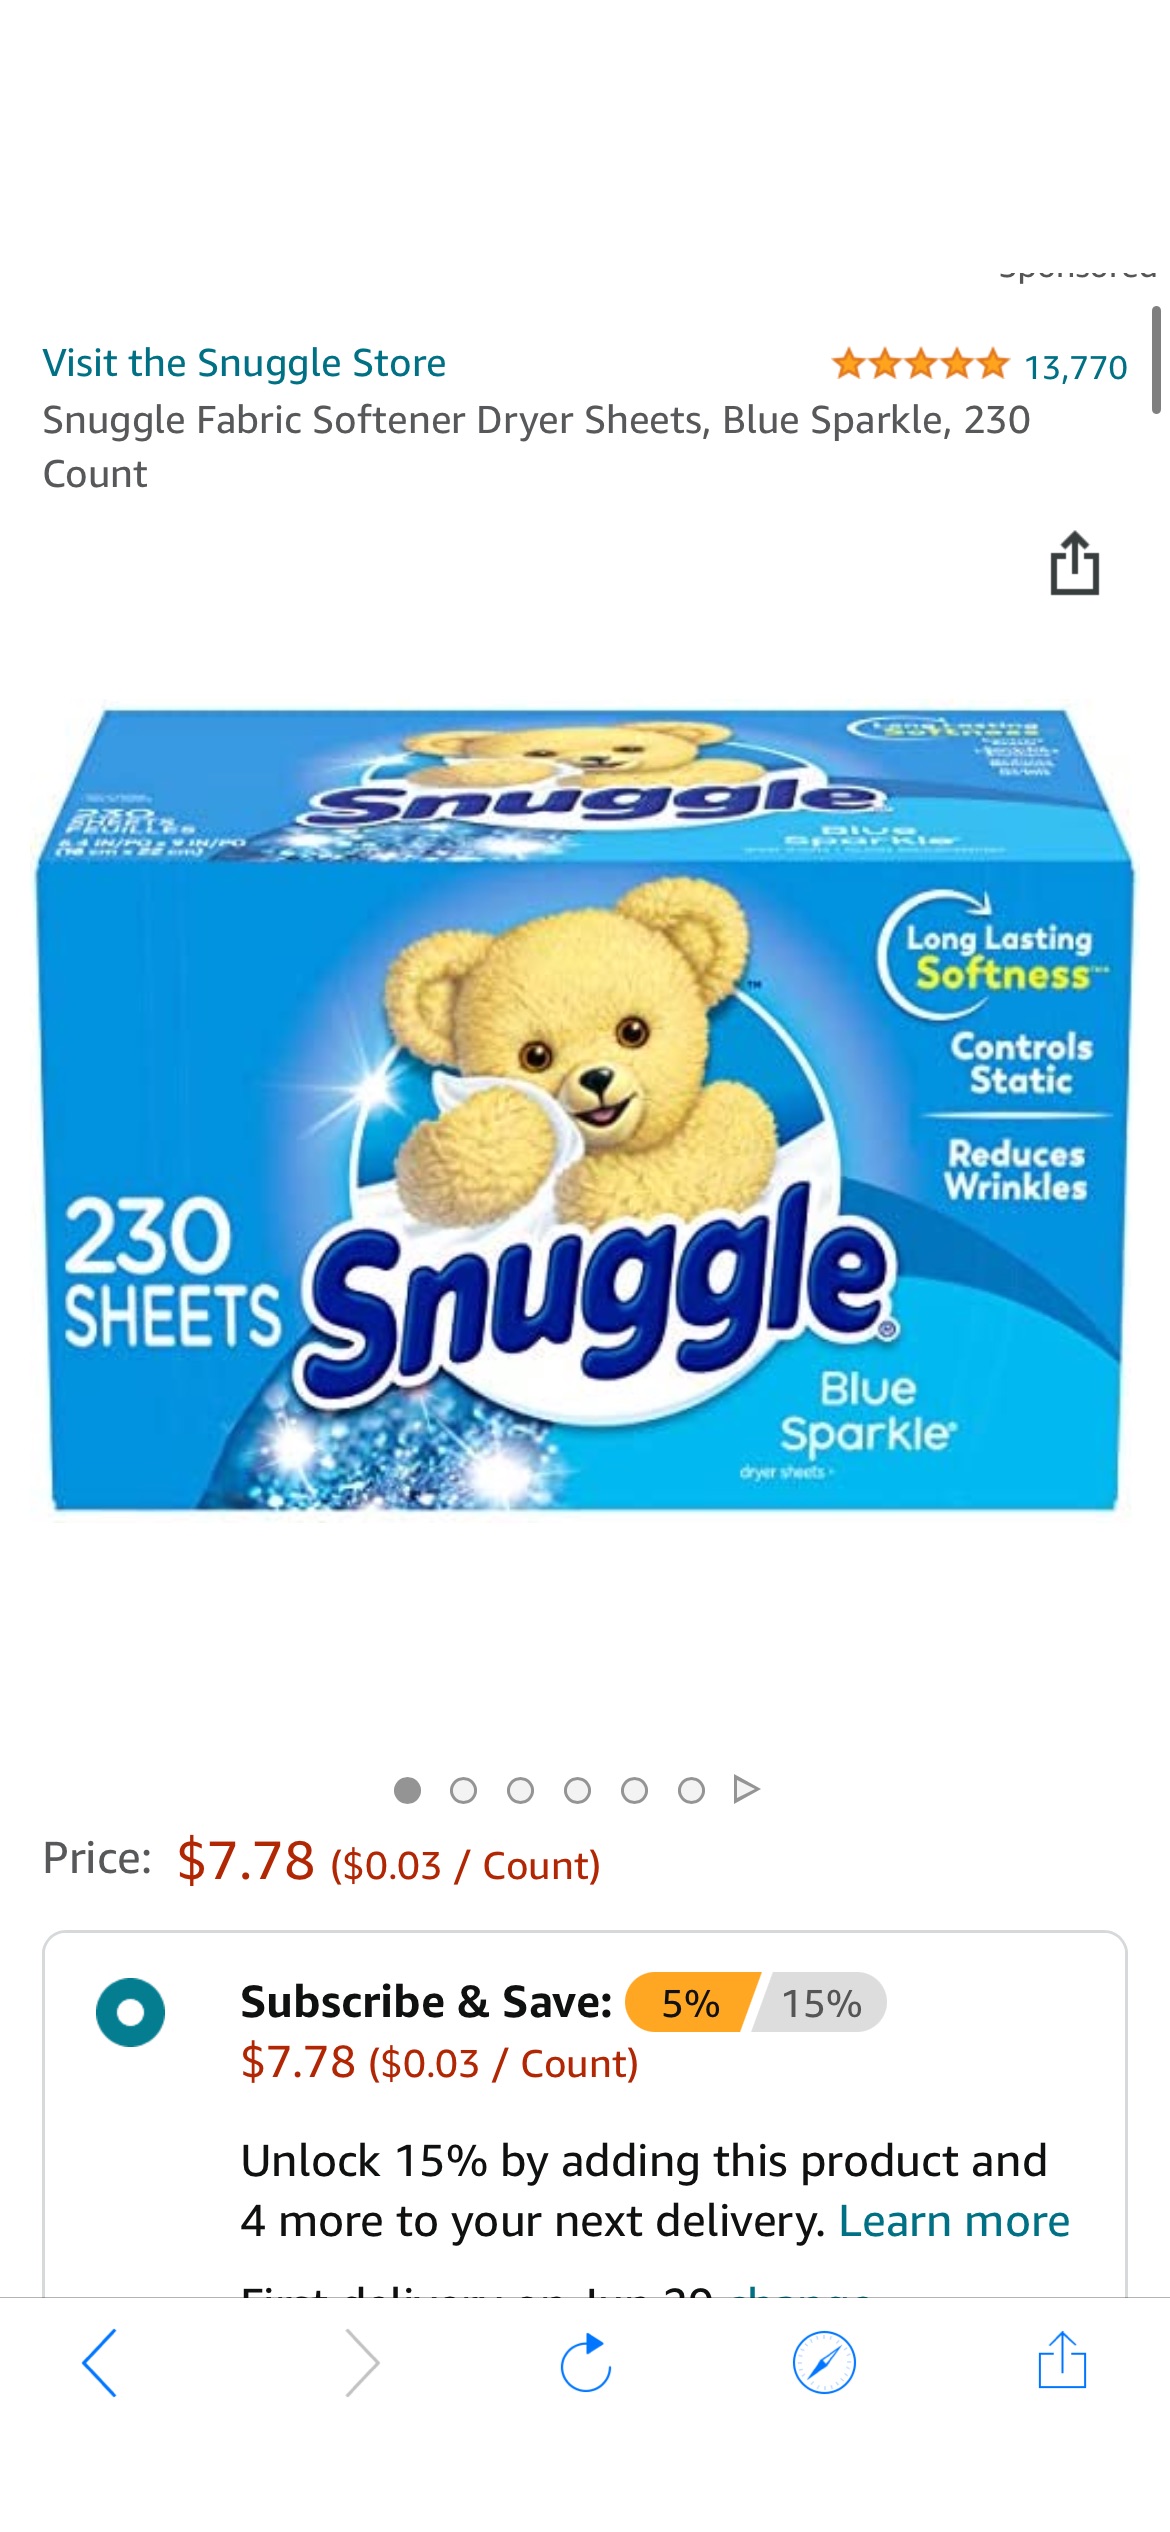 Snuggle Fabric Softener Dryer Sheets, Blue Sparkle, 230 Count : Health & Household 烘干纸